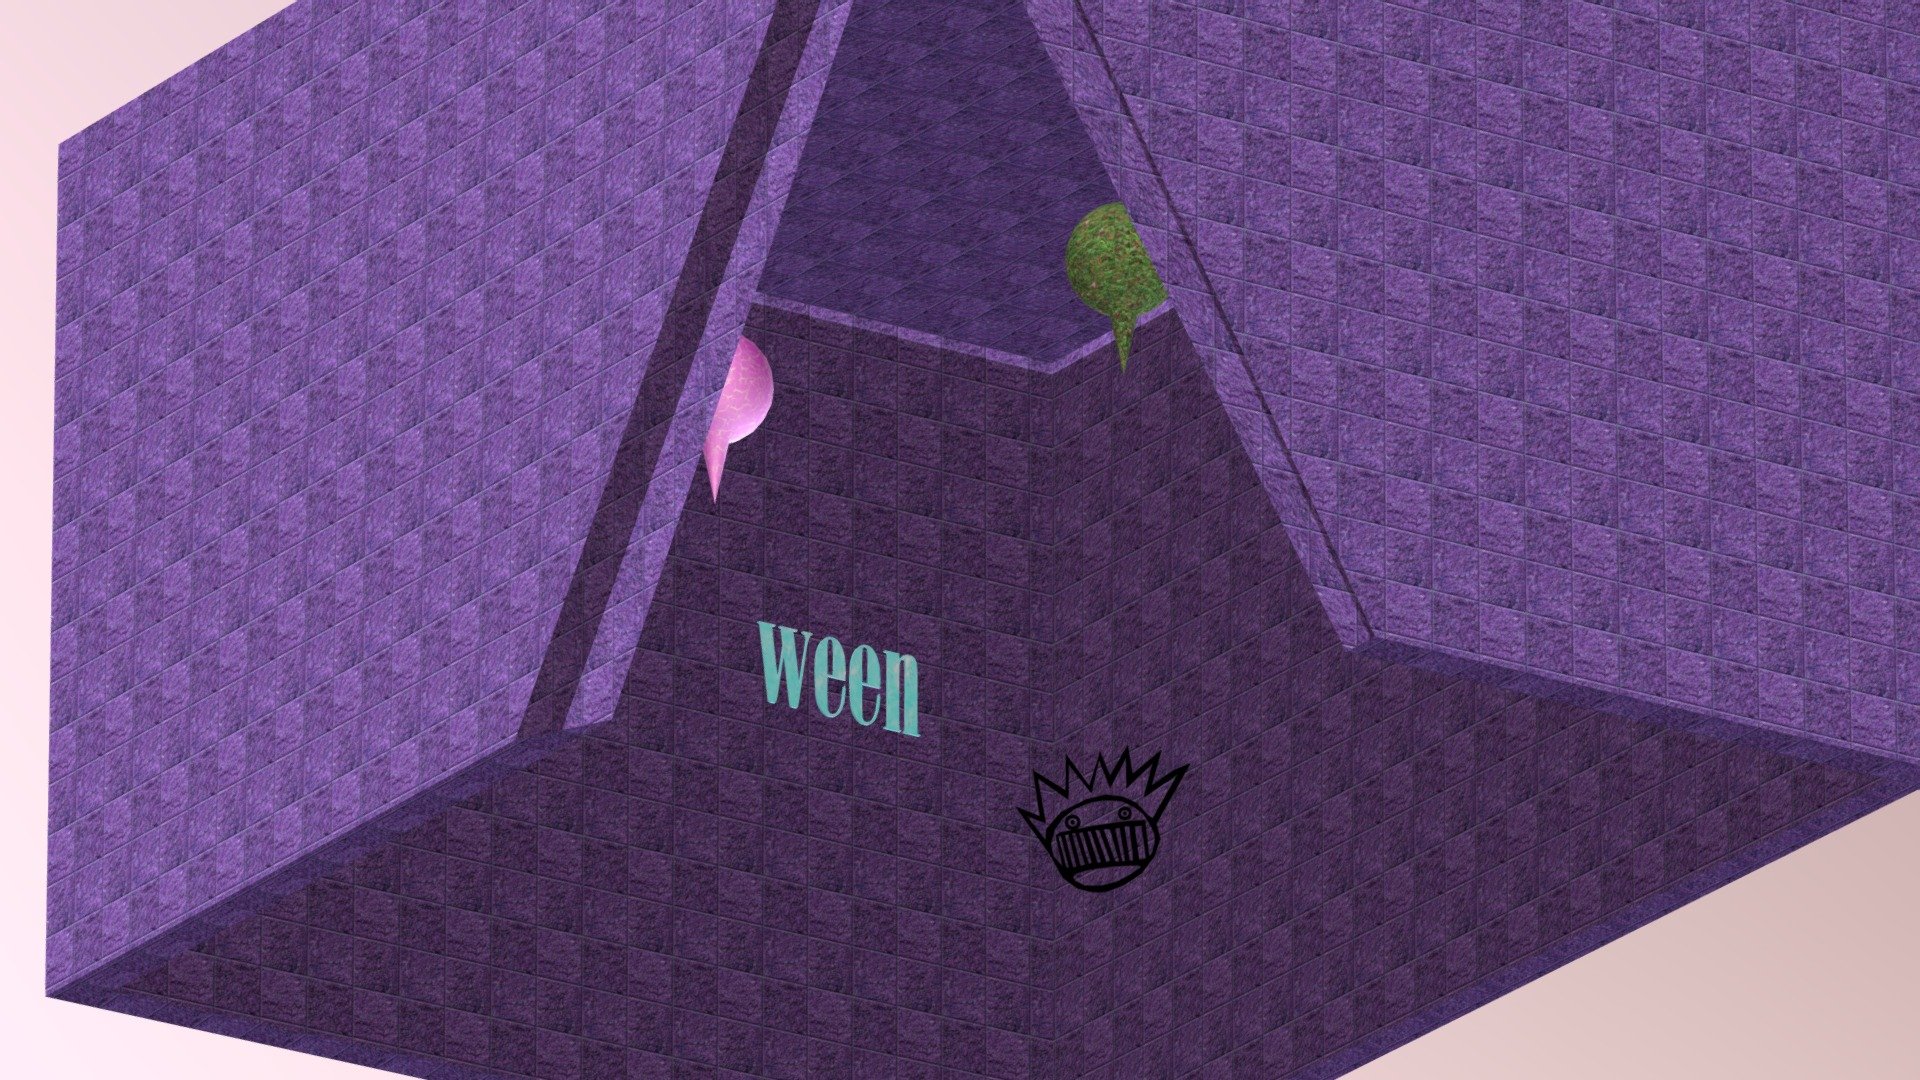 Ween House